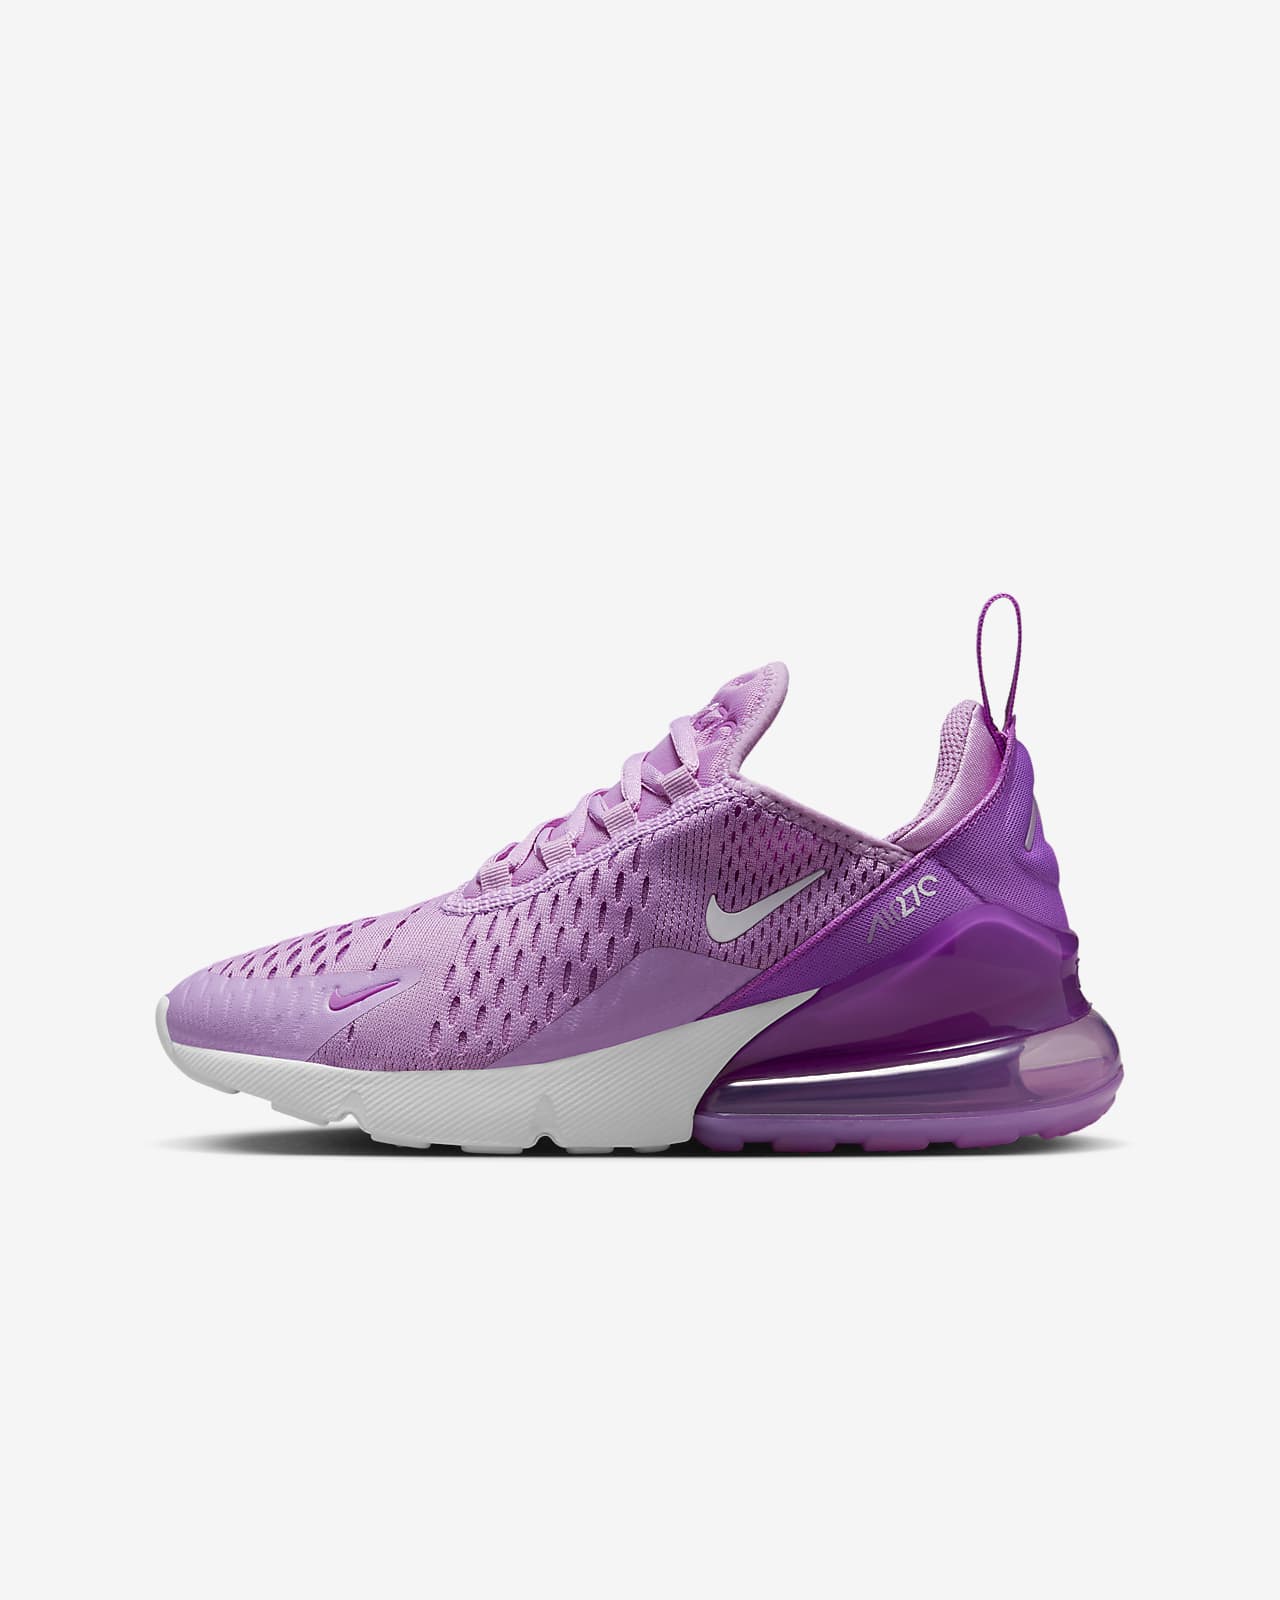  Nike Air Max 270 Girls Shoes Size 1, Color: Grey/Pink